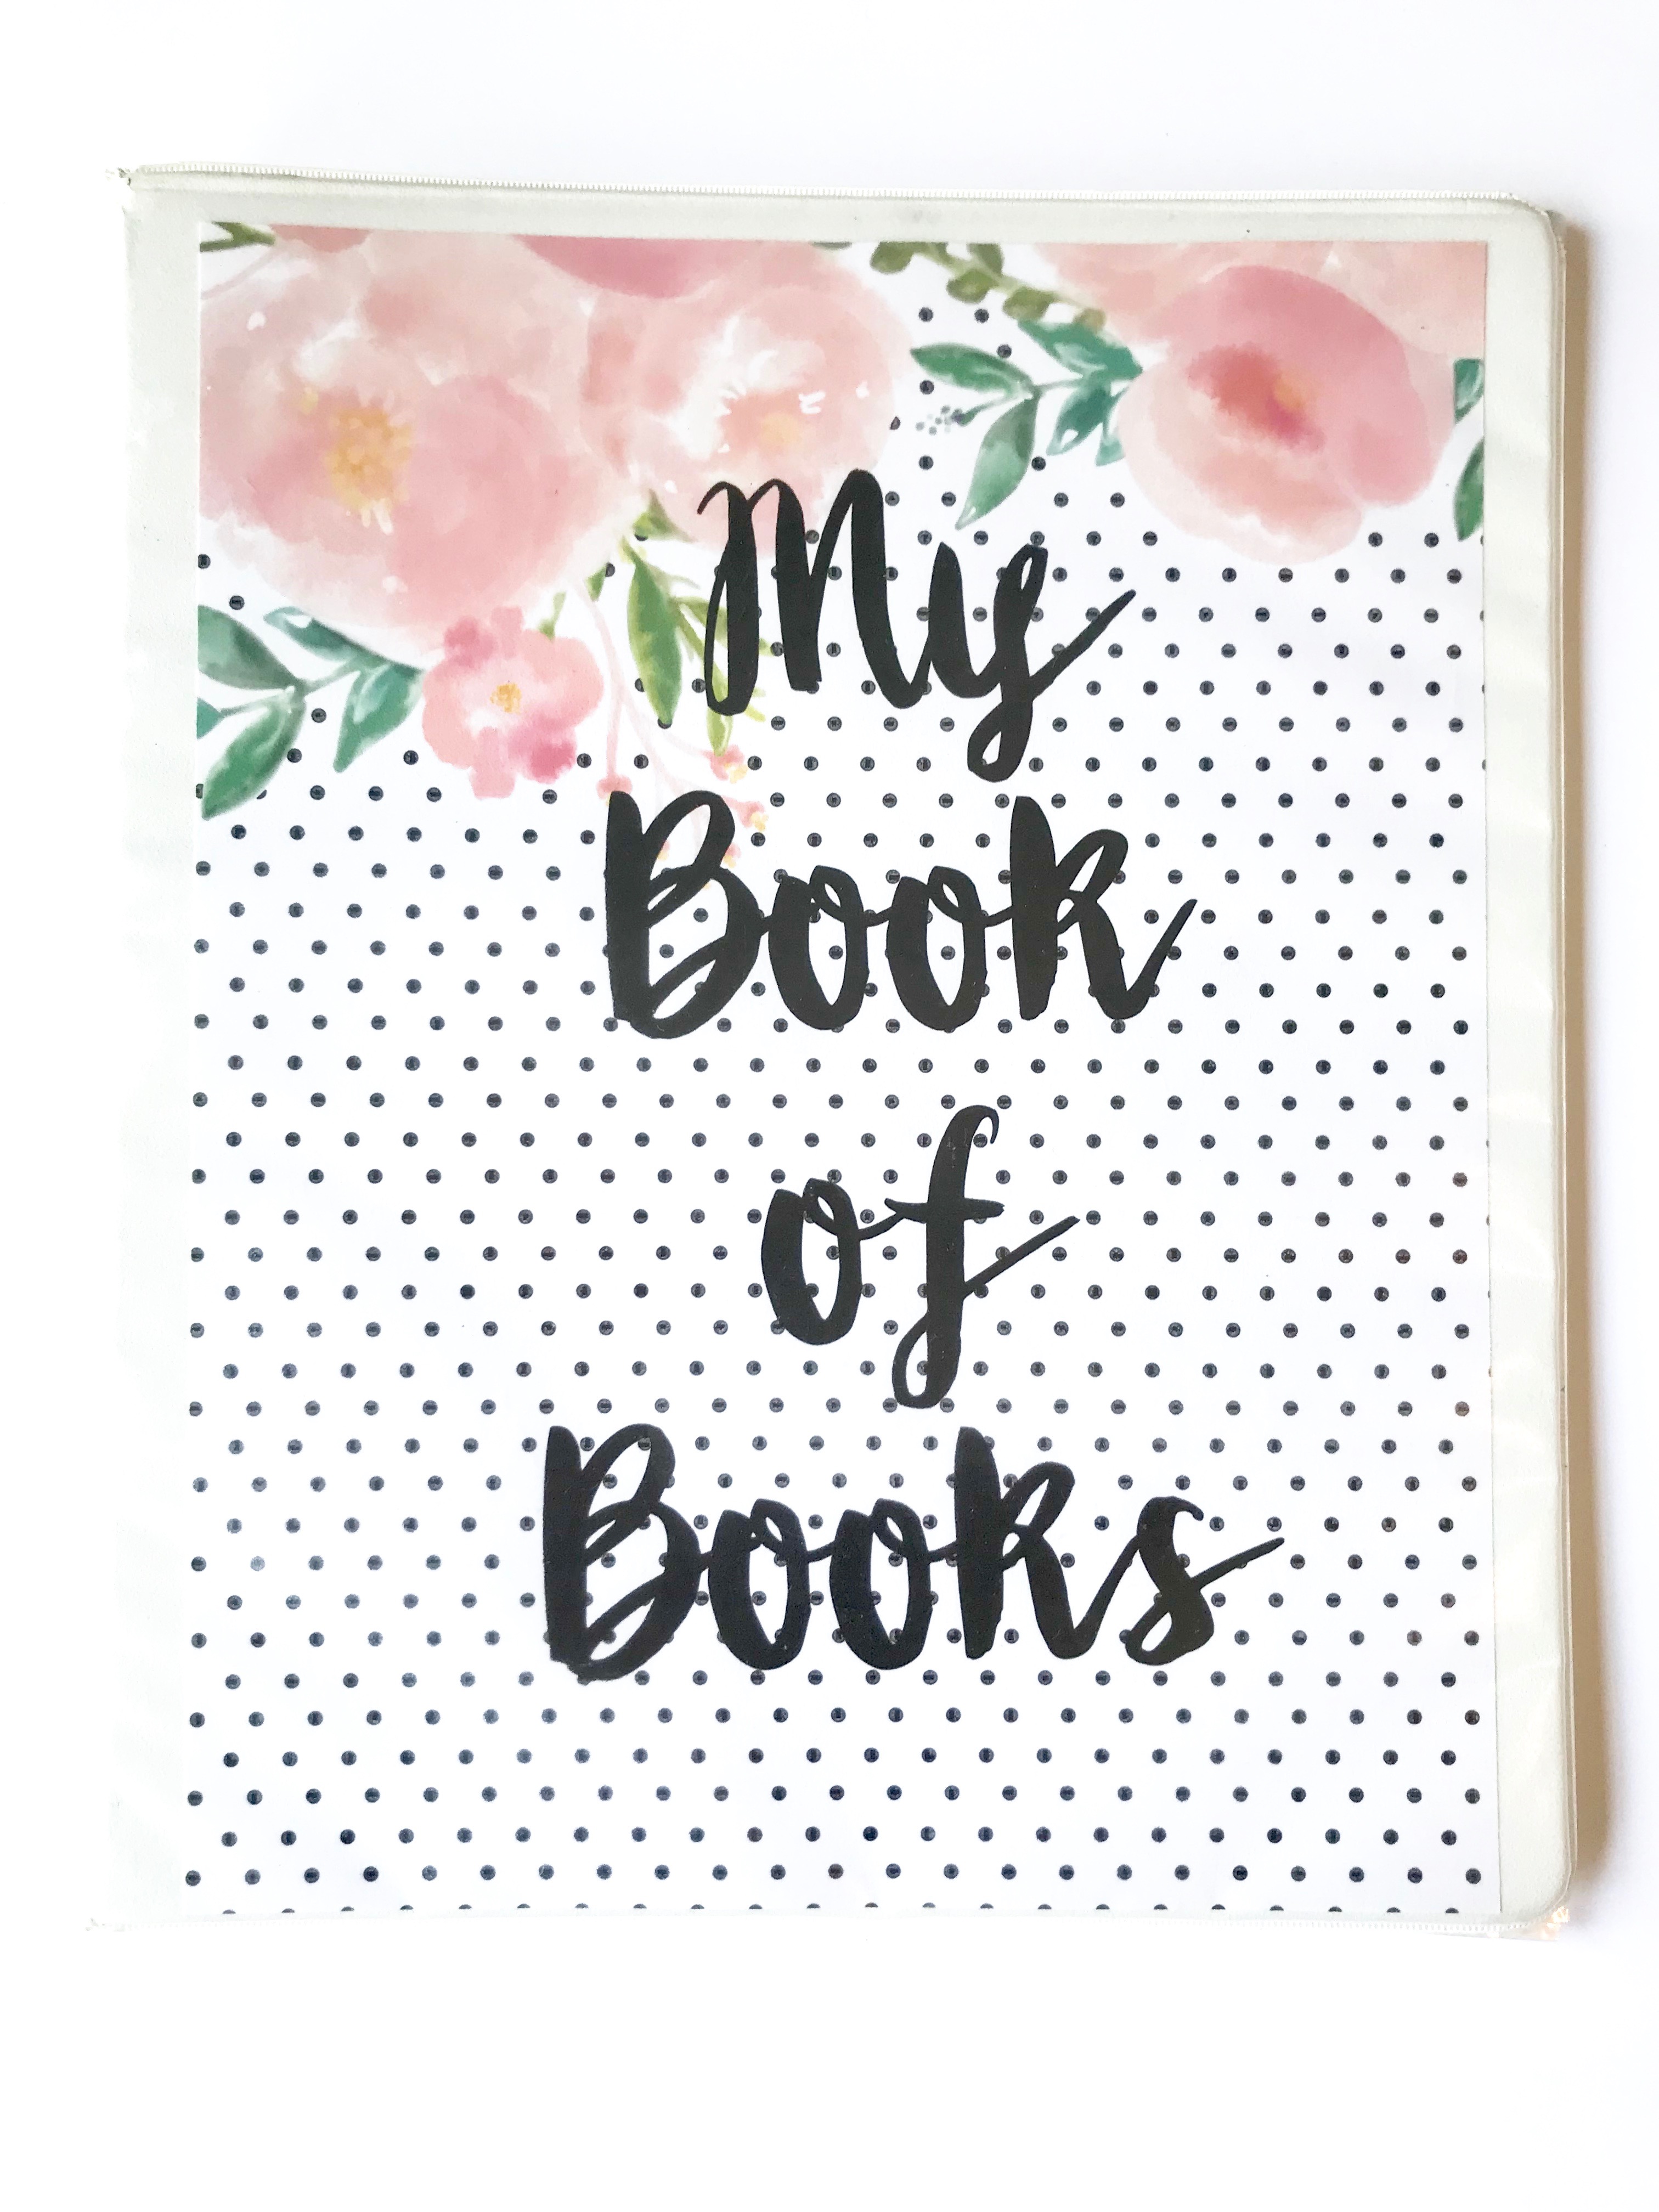 FREE Book Review Template Reading Journal Blossom Become